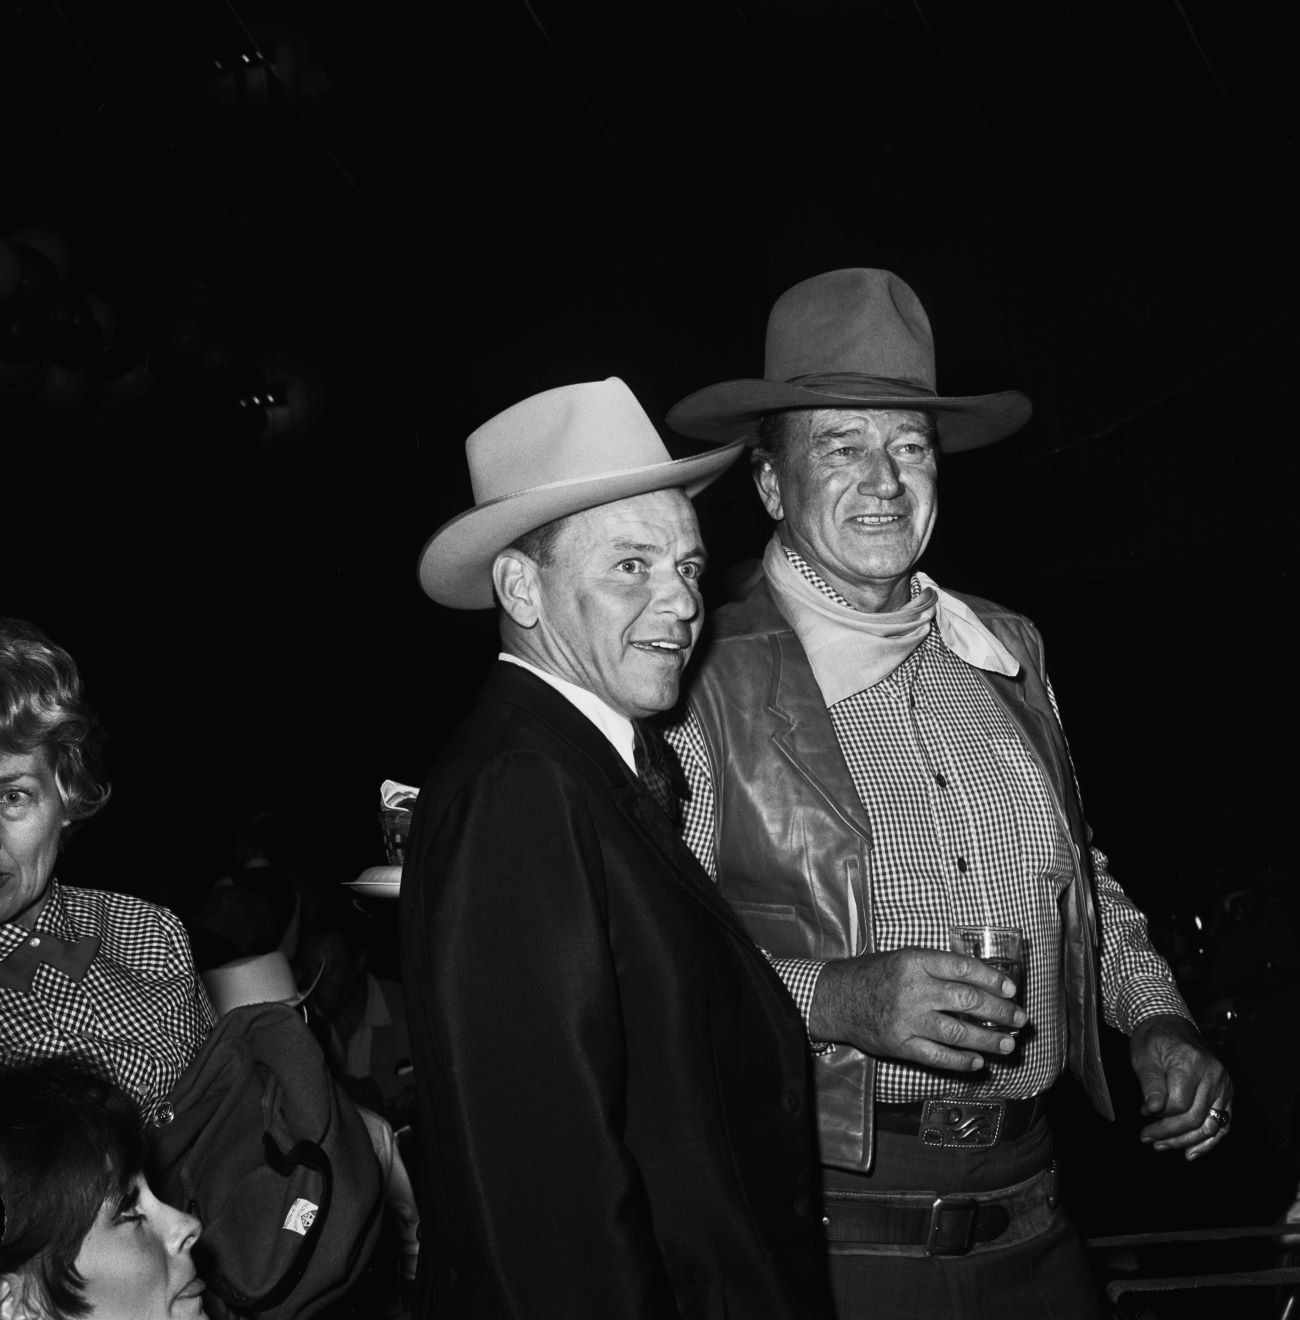 A black and white picture of Frank Sinatra and John Wayne wearing cowboy hats.